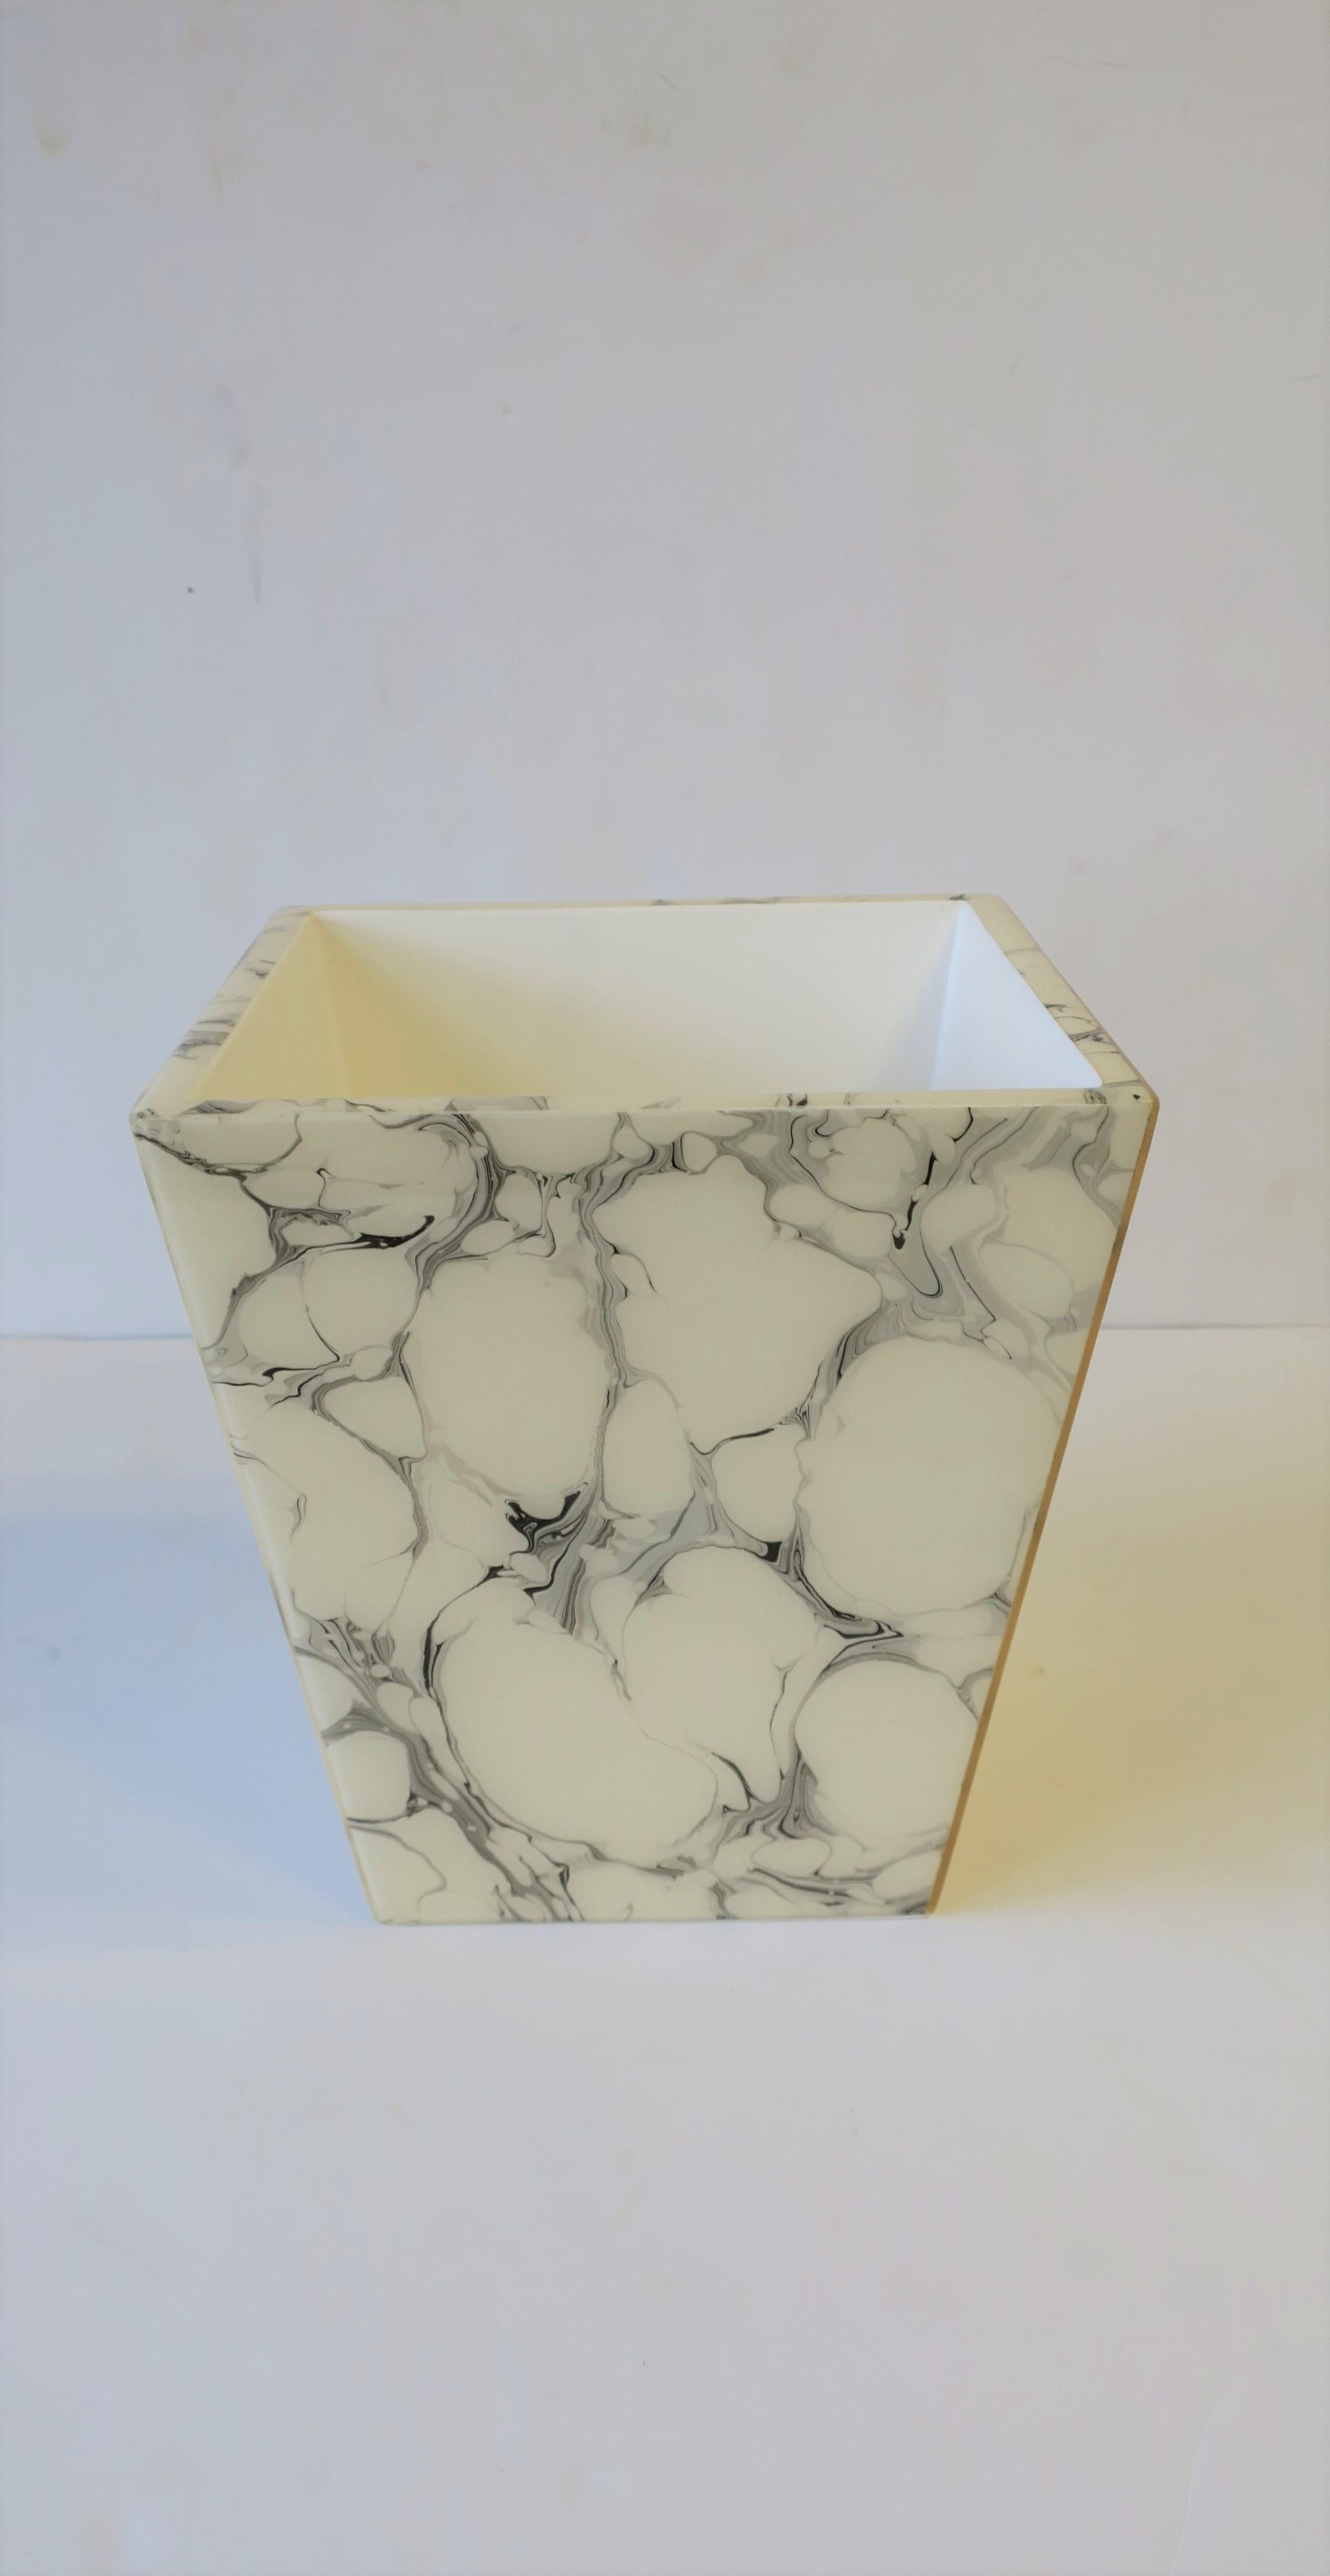 A beautiful black and white marbleized wastebasket [waste basket] or trash can set. Wastebasket set has an acrylic marble-like veneer with a white lacquer interior. Set includes 1 wastebasket, 2 boxes with lids, and 2 vanity or desk vessels. A five